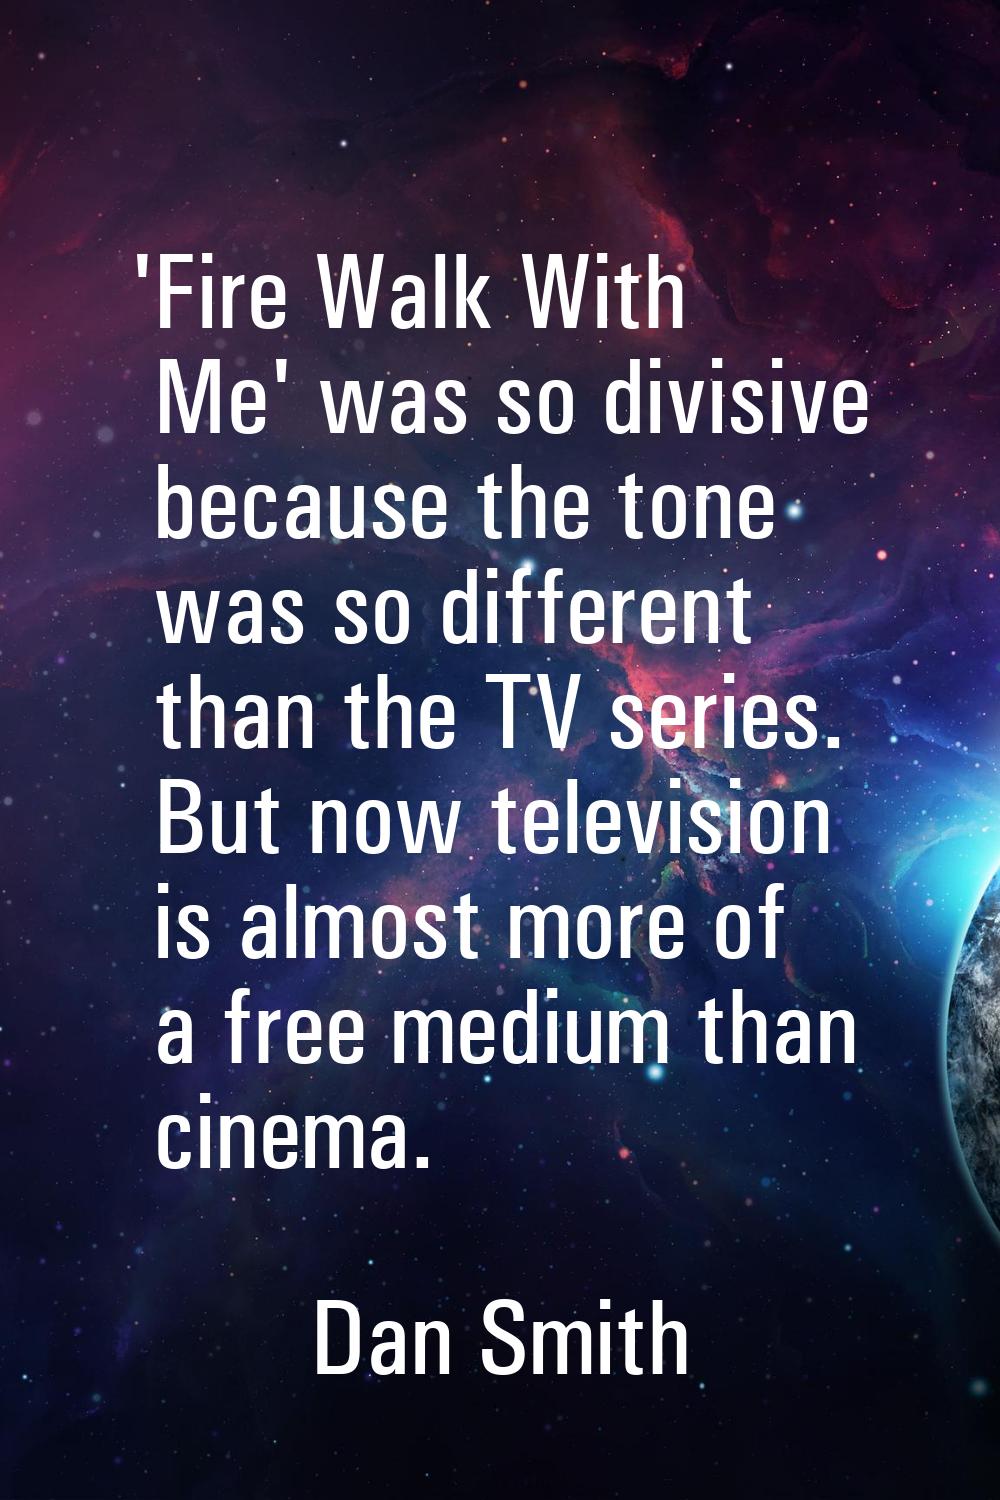 'Fire Walk With Me' was so divisive because the tone was so different than the TV series. But now t